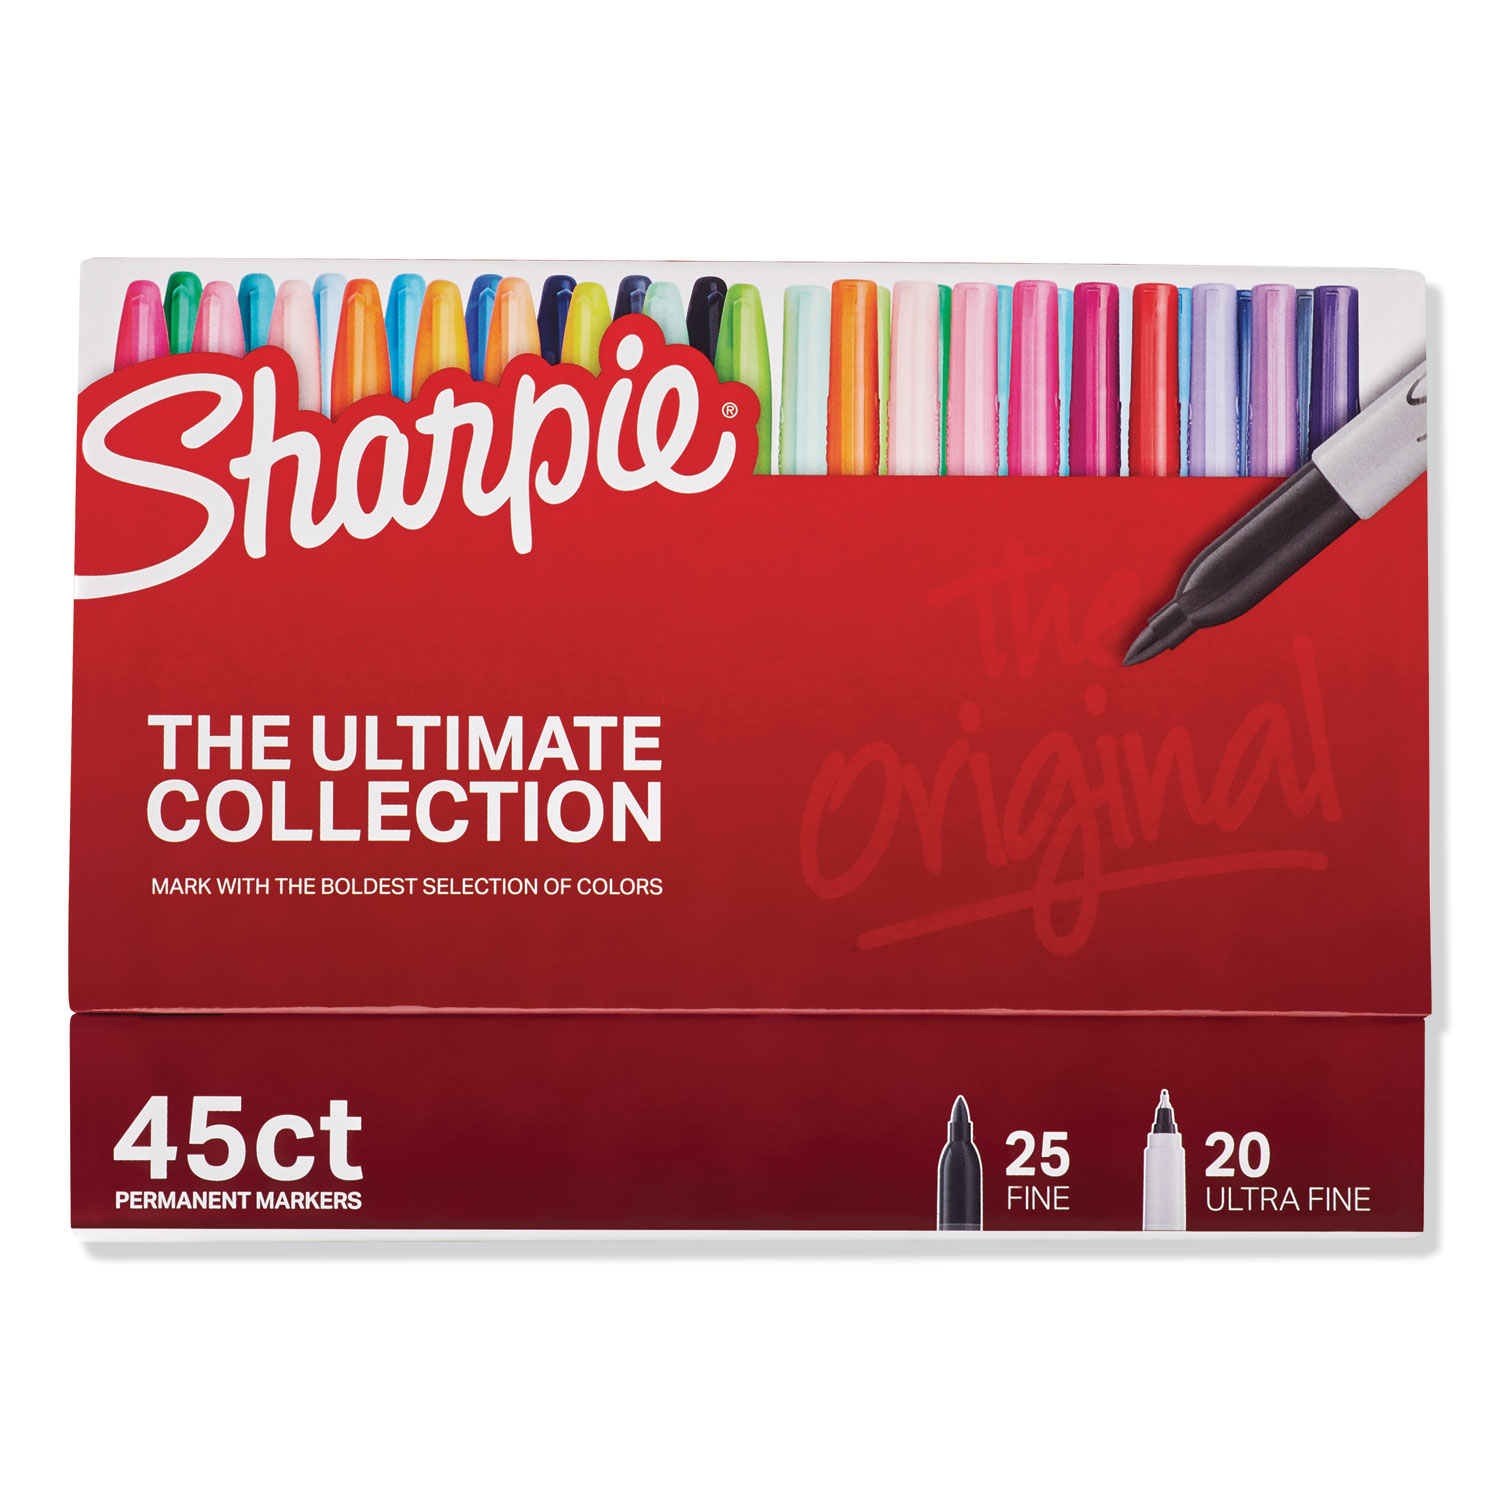 Sharpie Mystic Gems Markers, Ultra-Fine Needle Tip, Assorted, 24/Pack